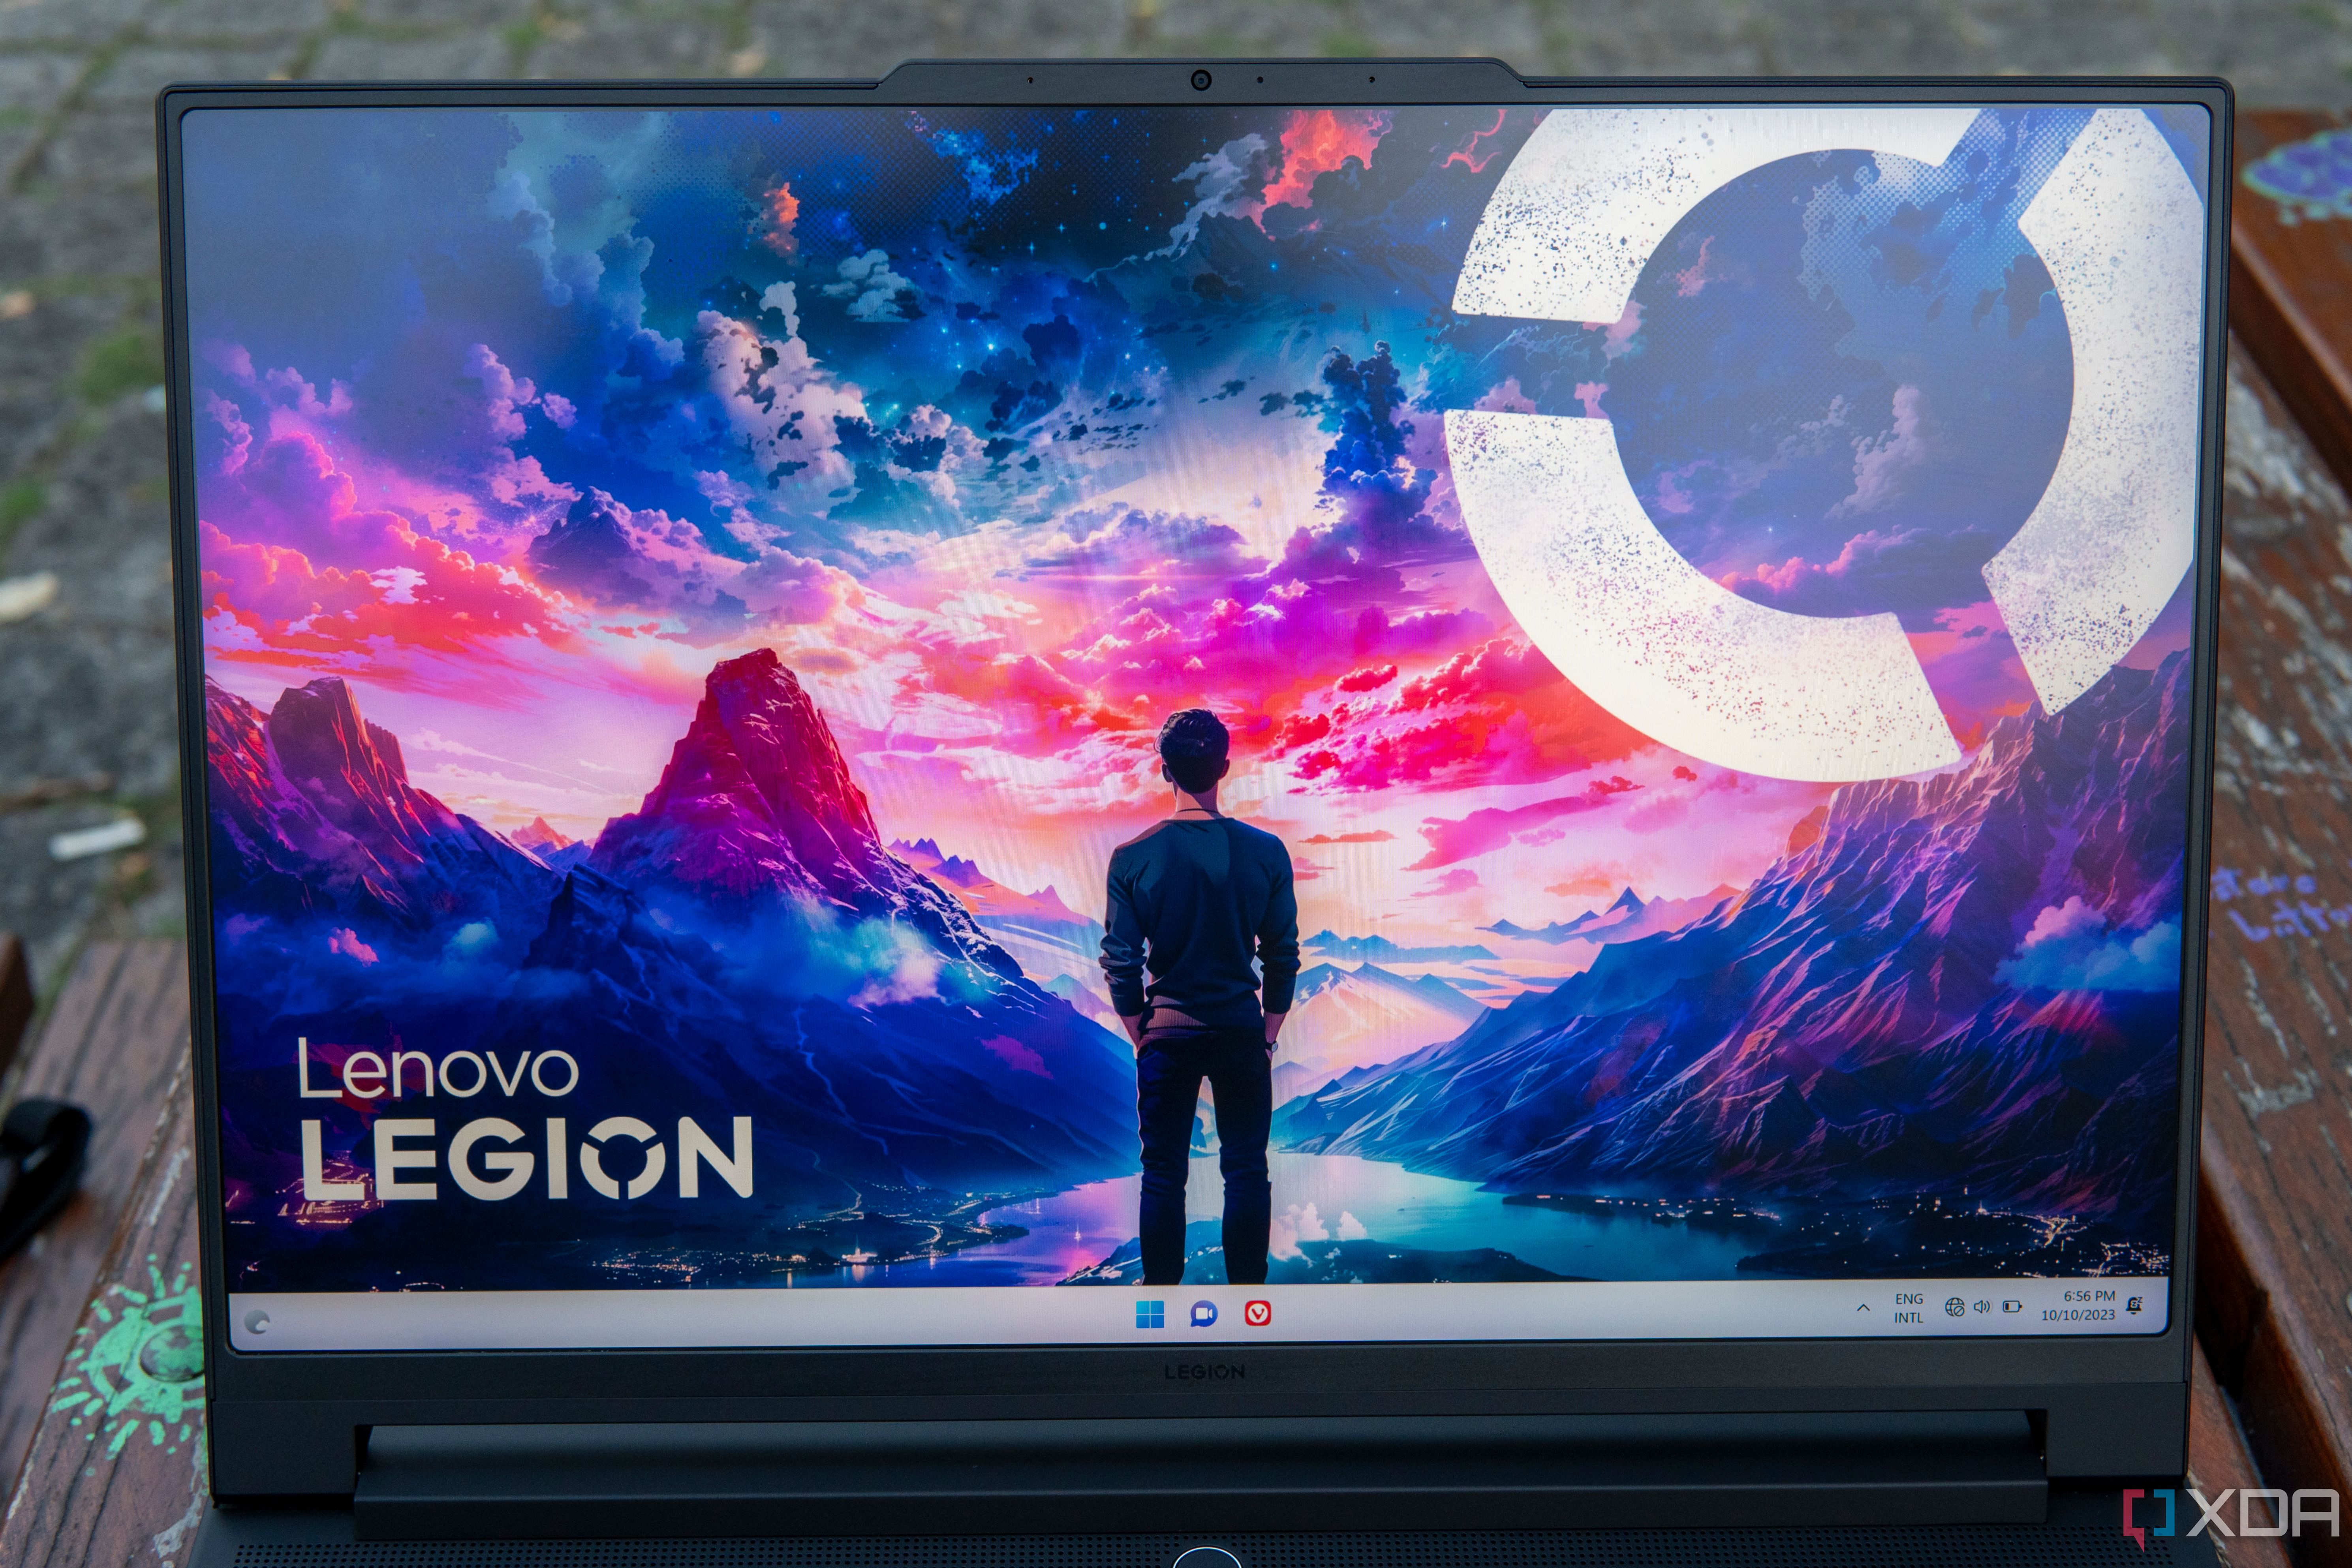 Front view of the Lenovo Legion 9i display showing the desktop background